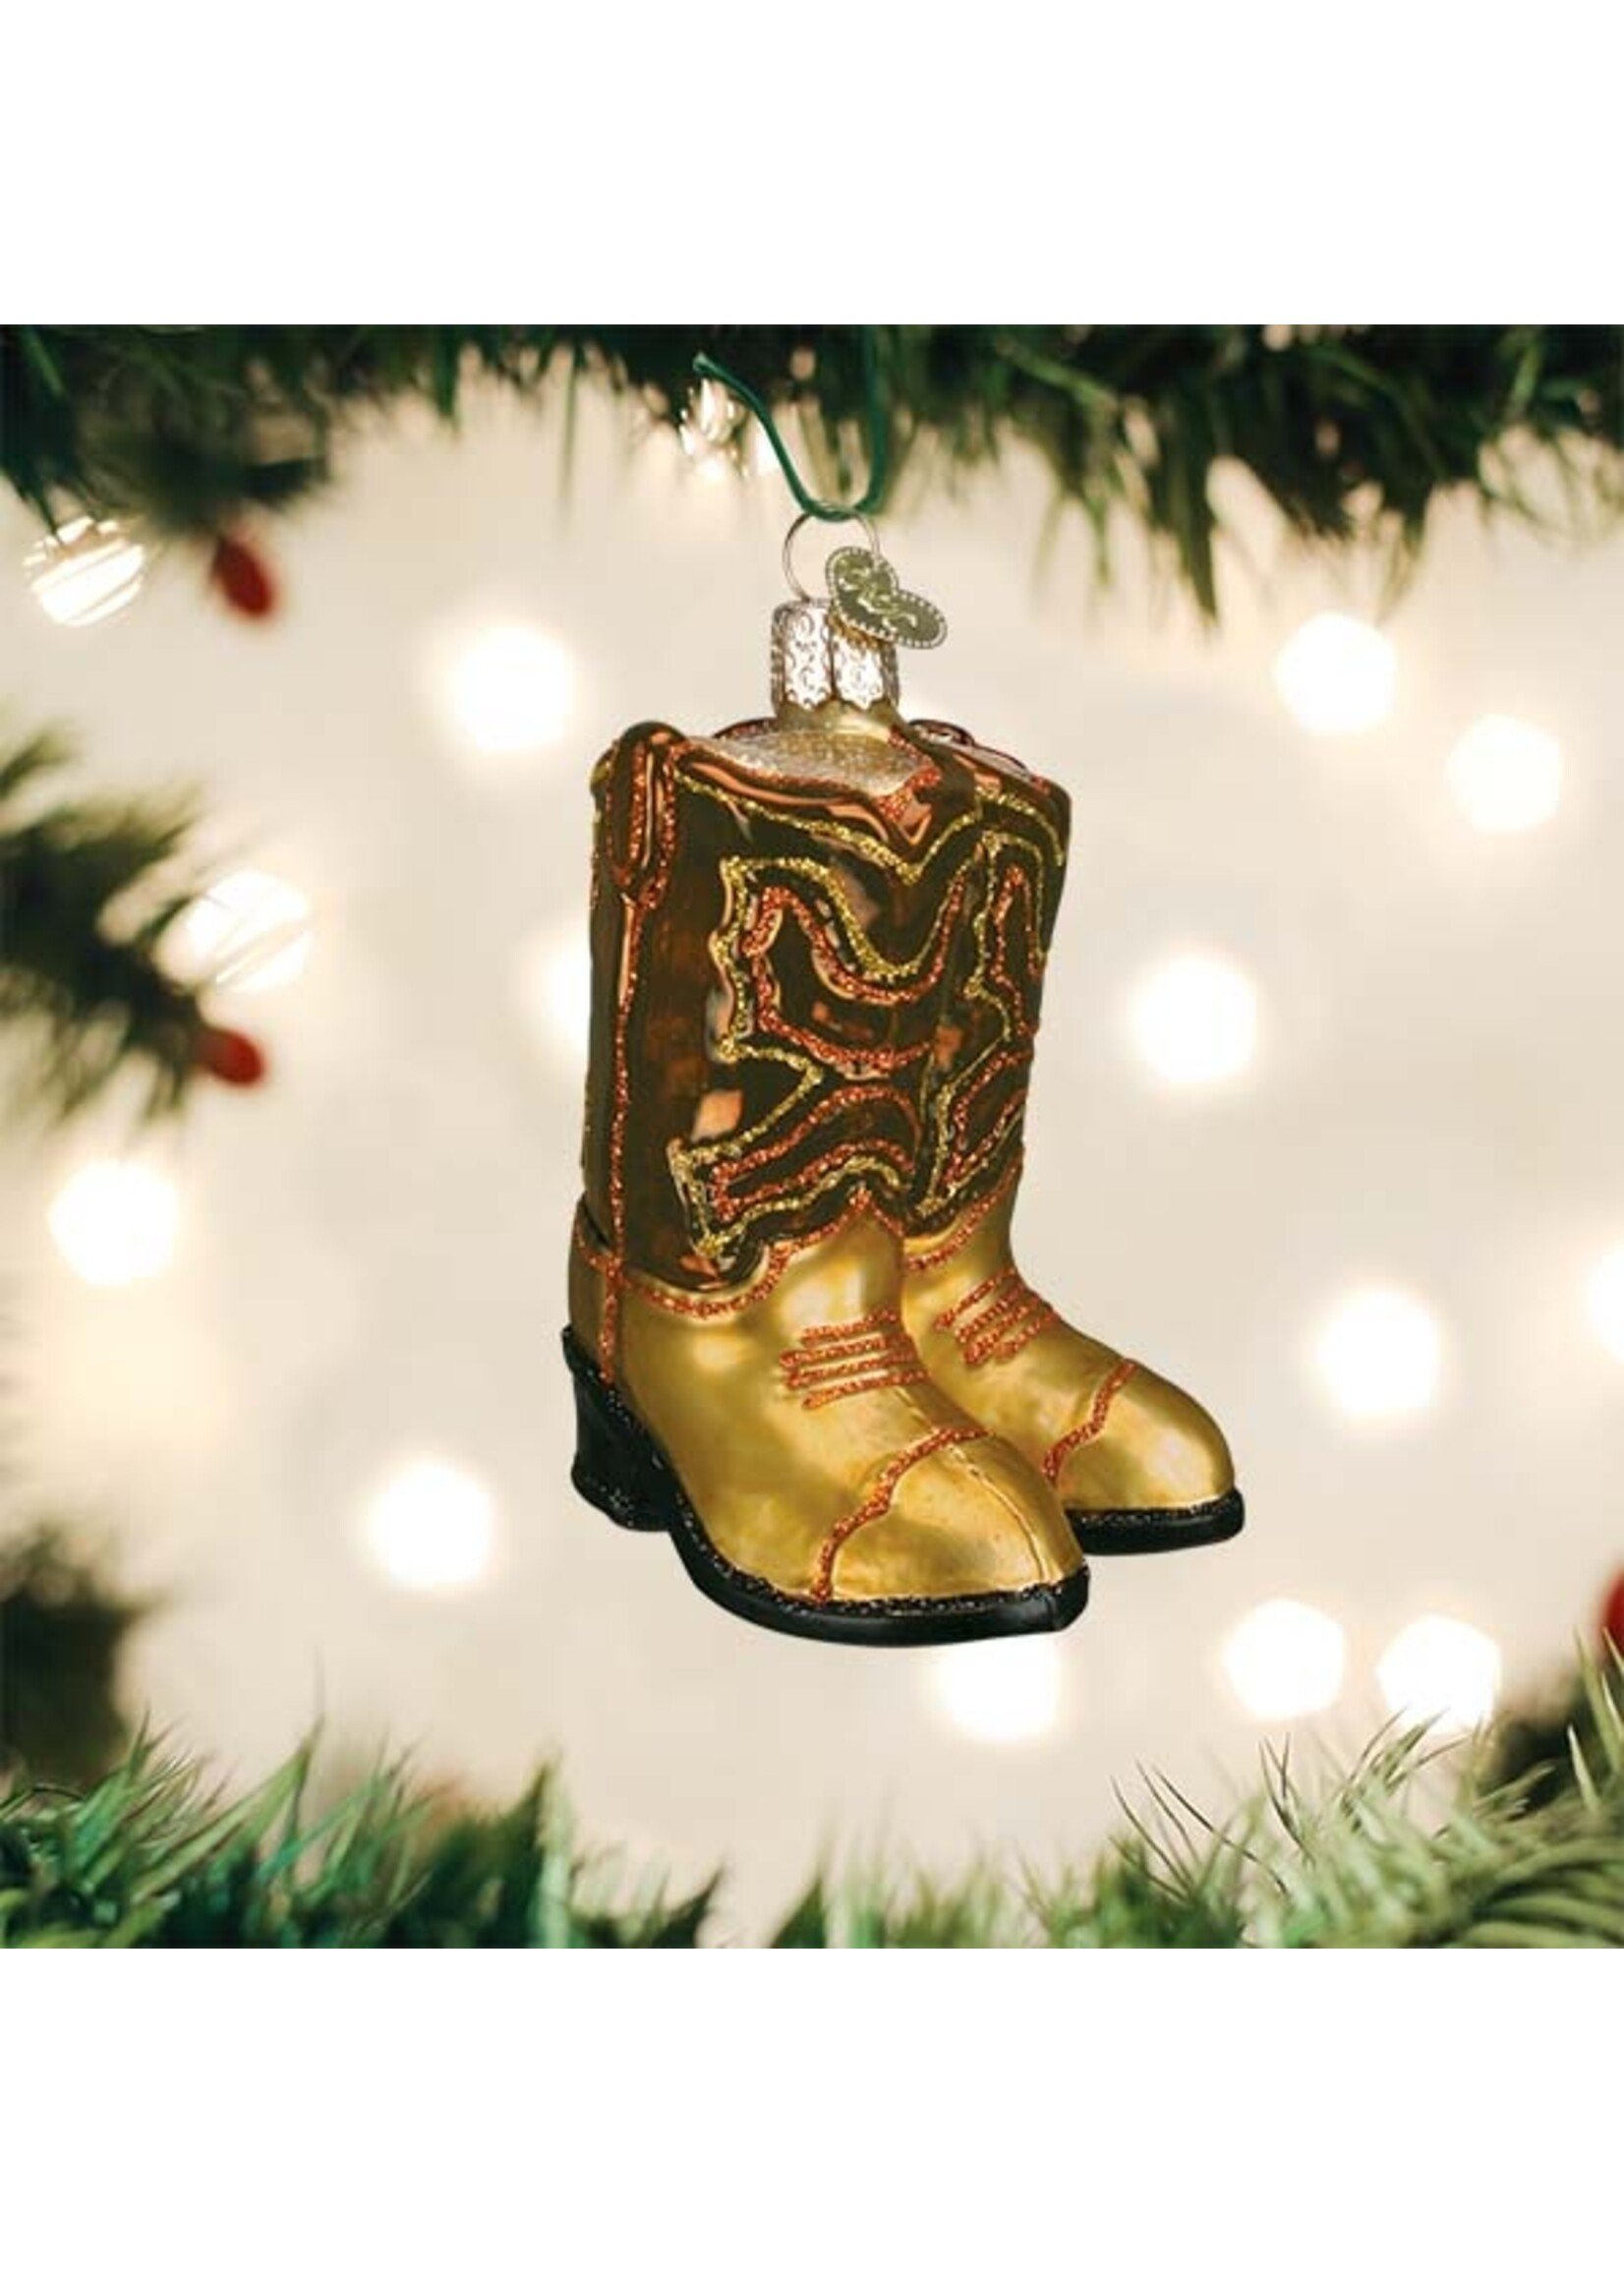 Old World Christmas Old World Brown Pair of Cowboy Boots